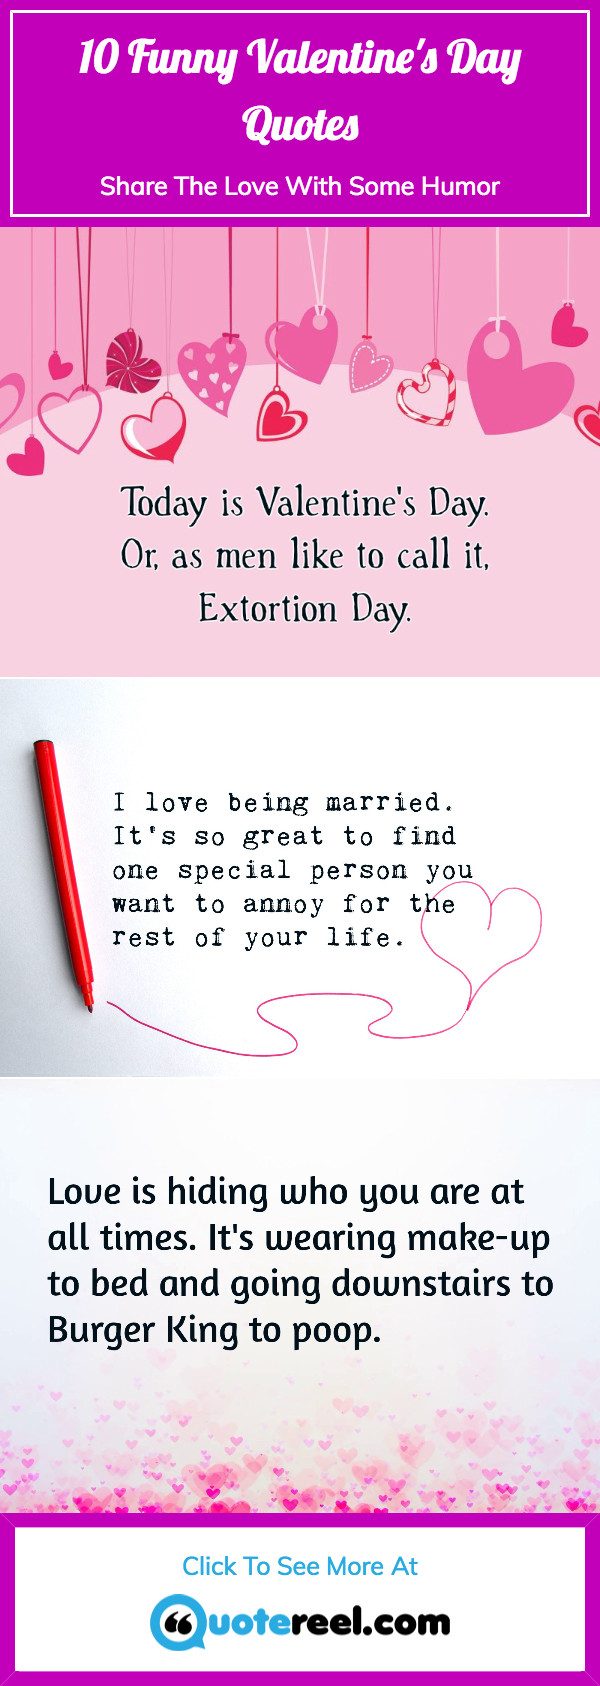 Valentines Day Quote Funny
 Funny Valentine s Quotes That Add A Bit Humor To The